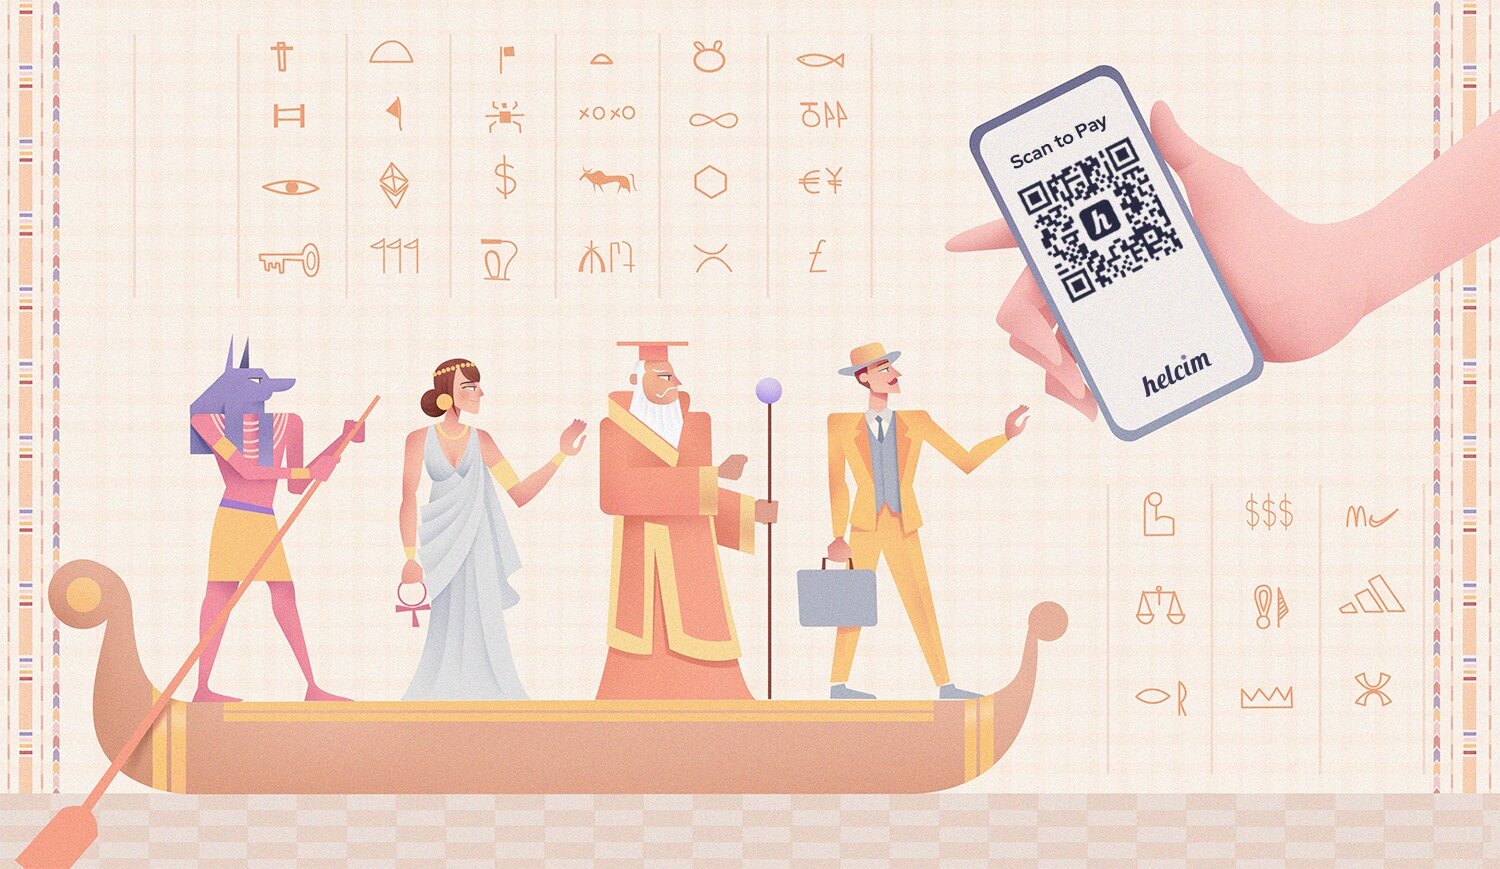 Civilizations through the ages with QR code and cell phone